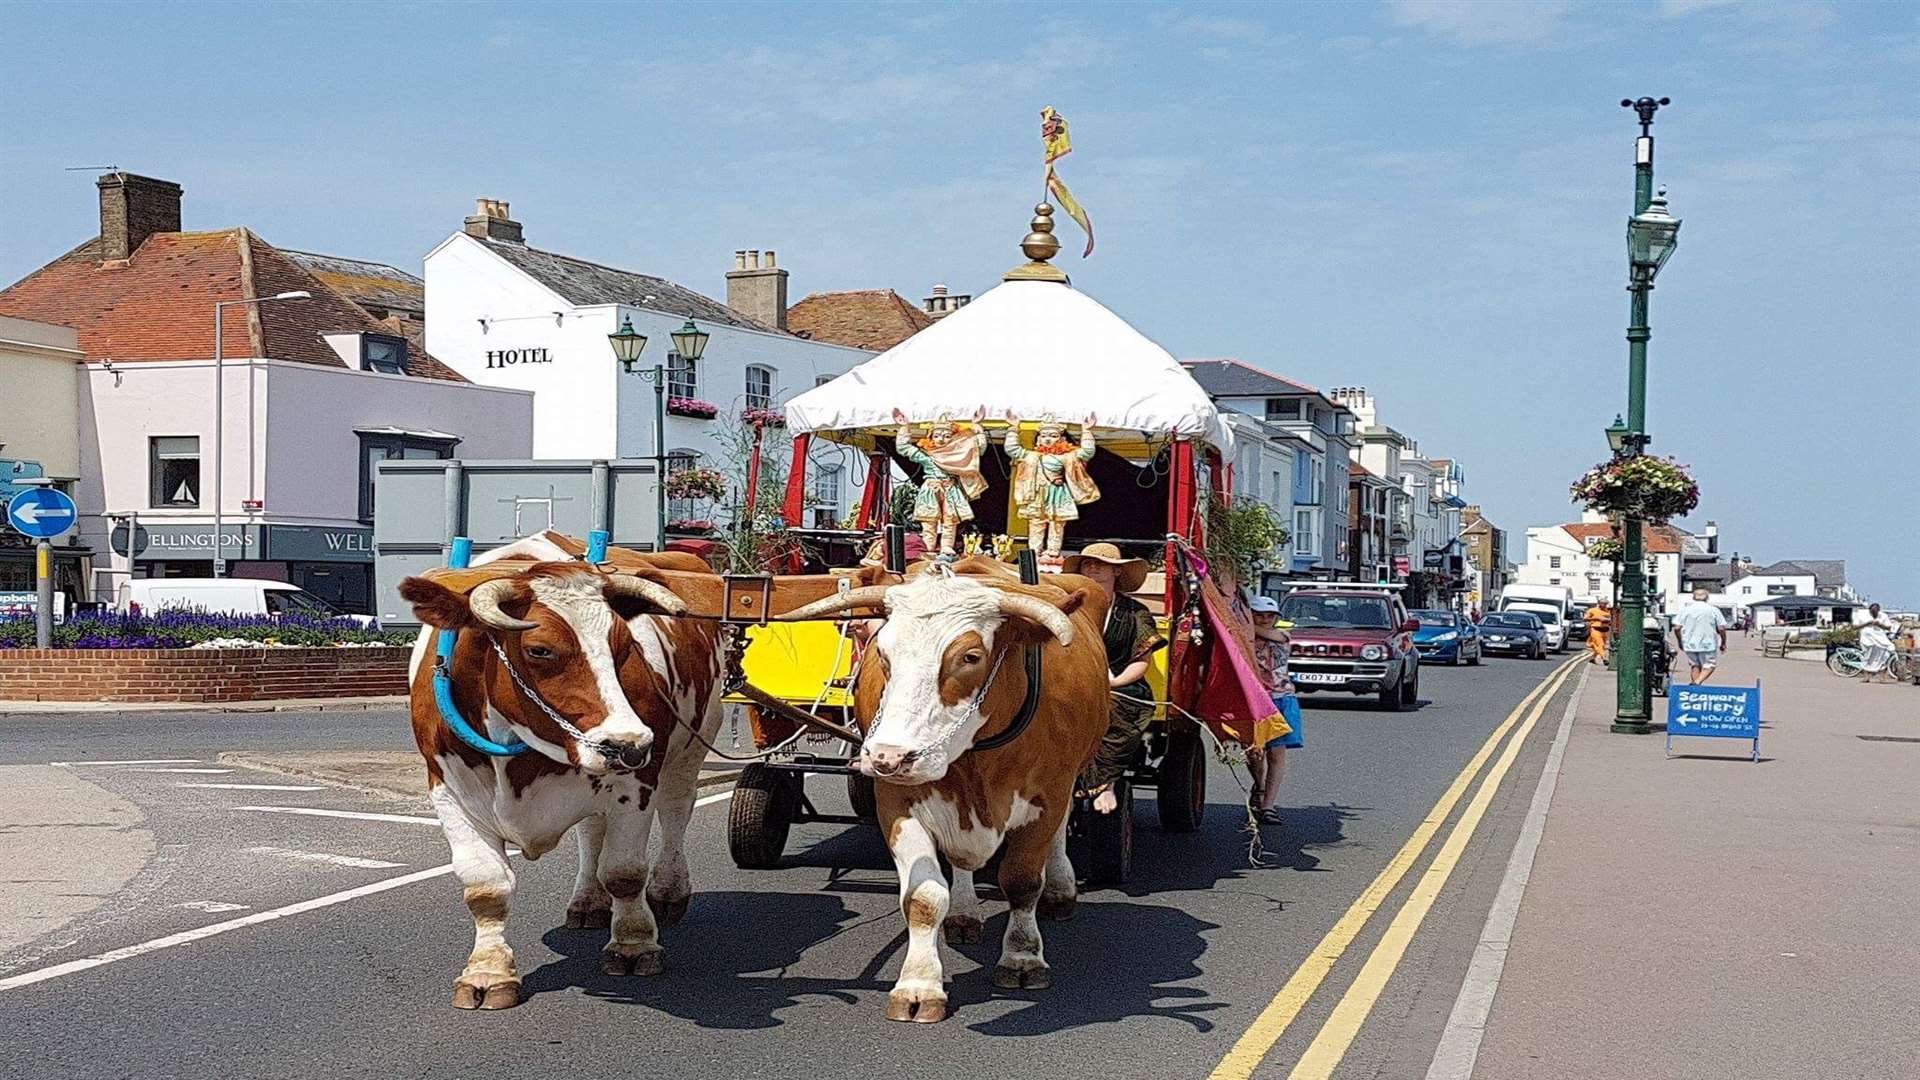 The Hare Krishna passing through Deal